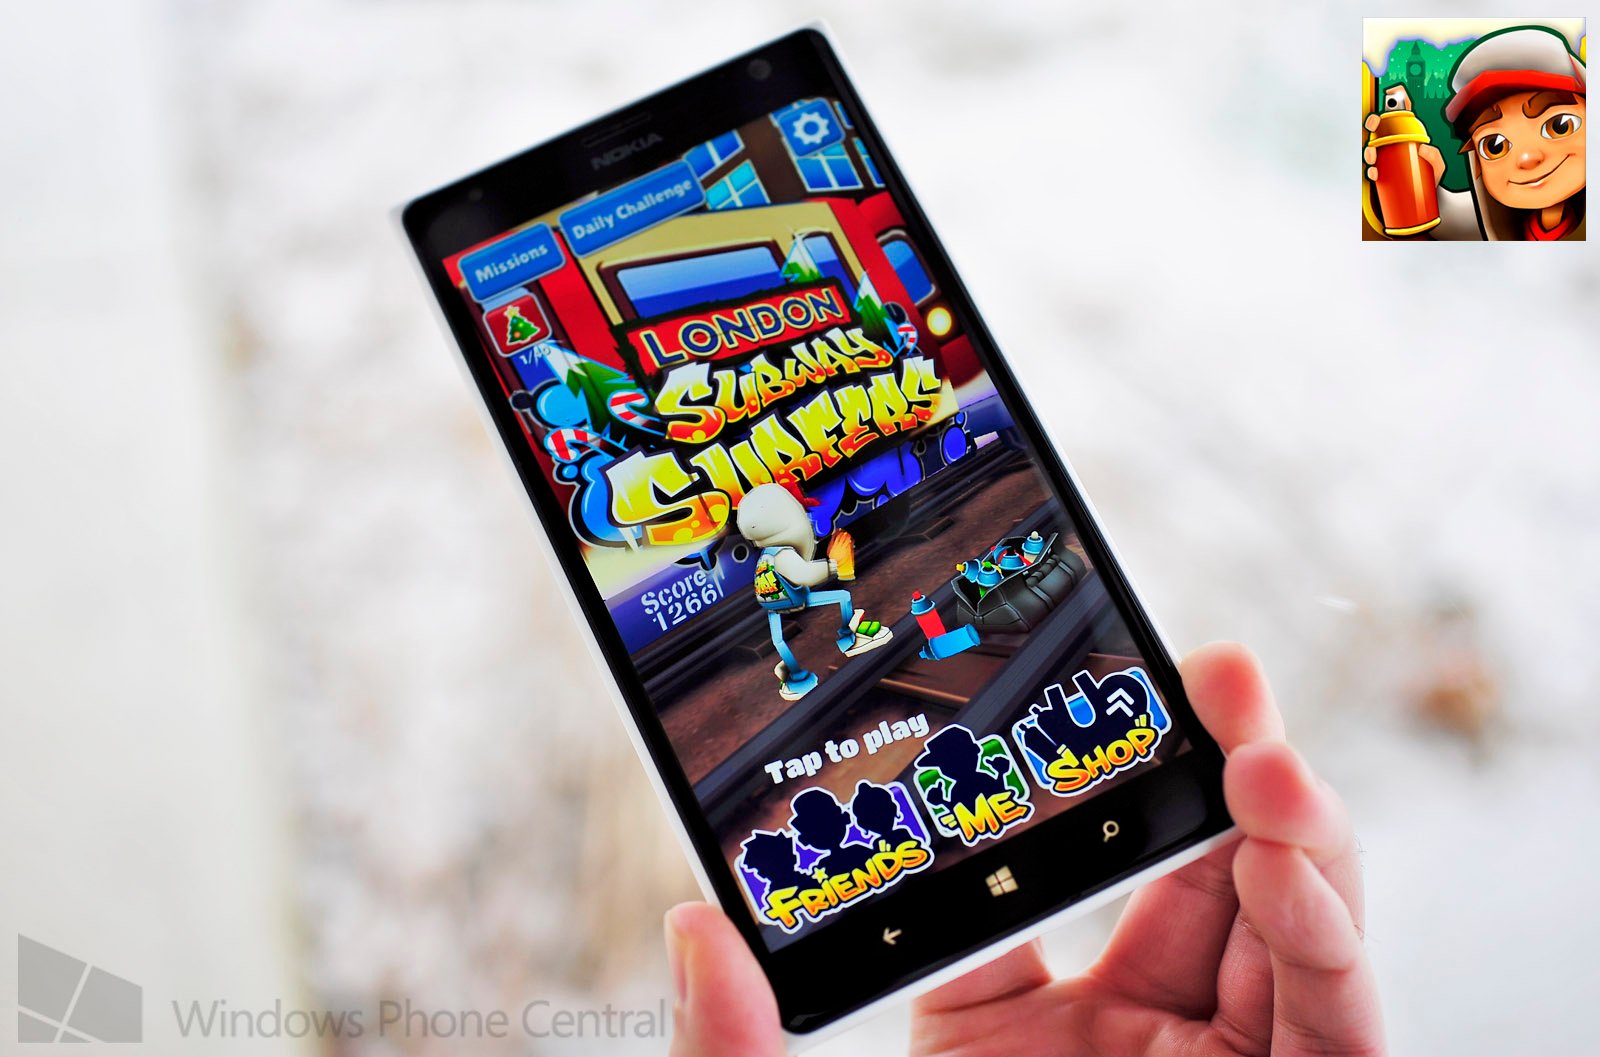 Subway Surfers now available for Windows Phone 8